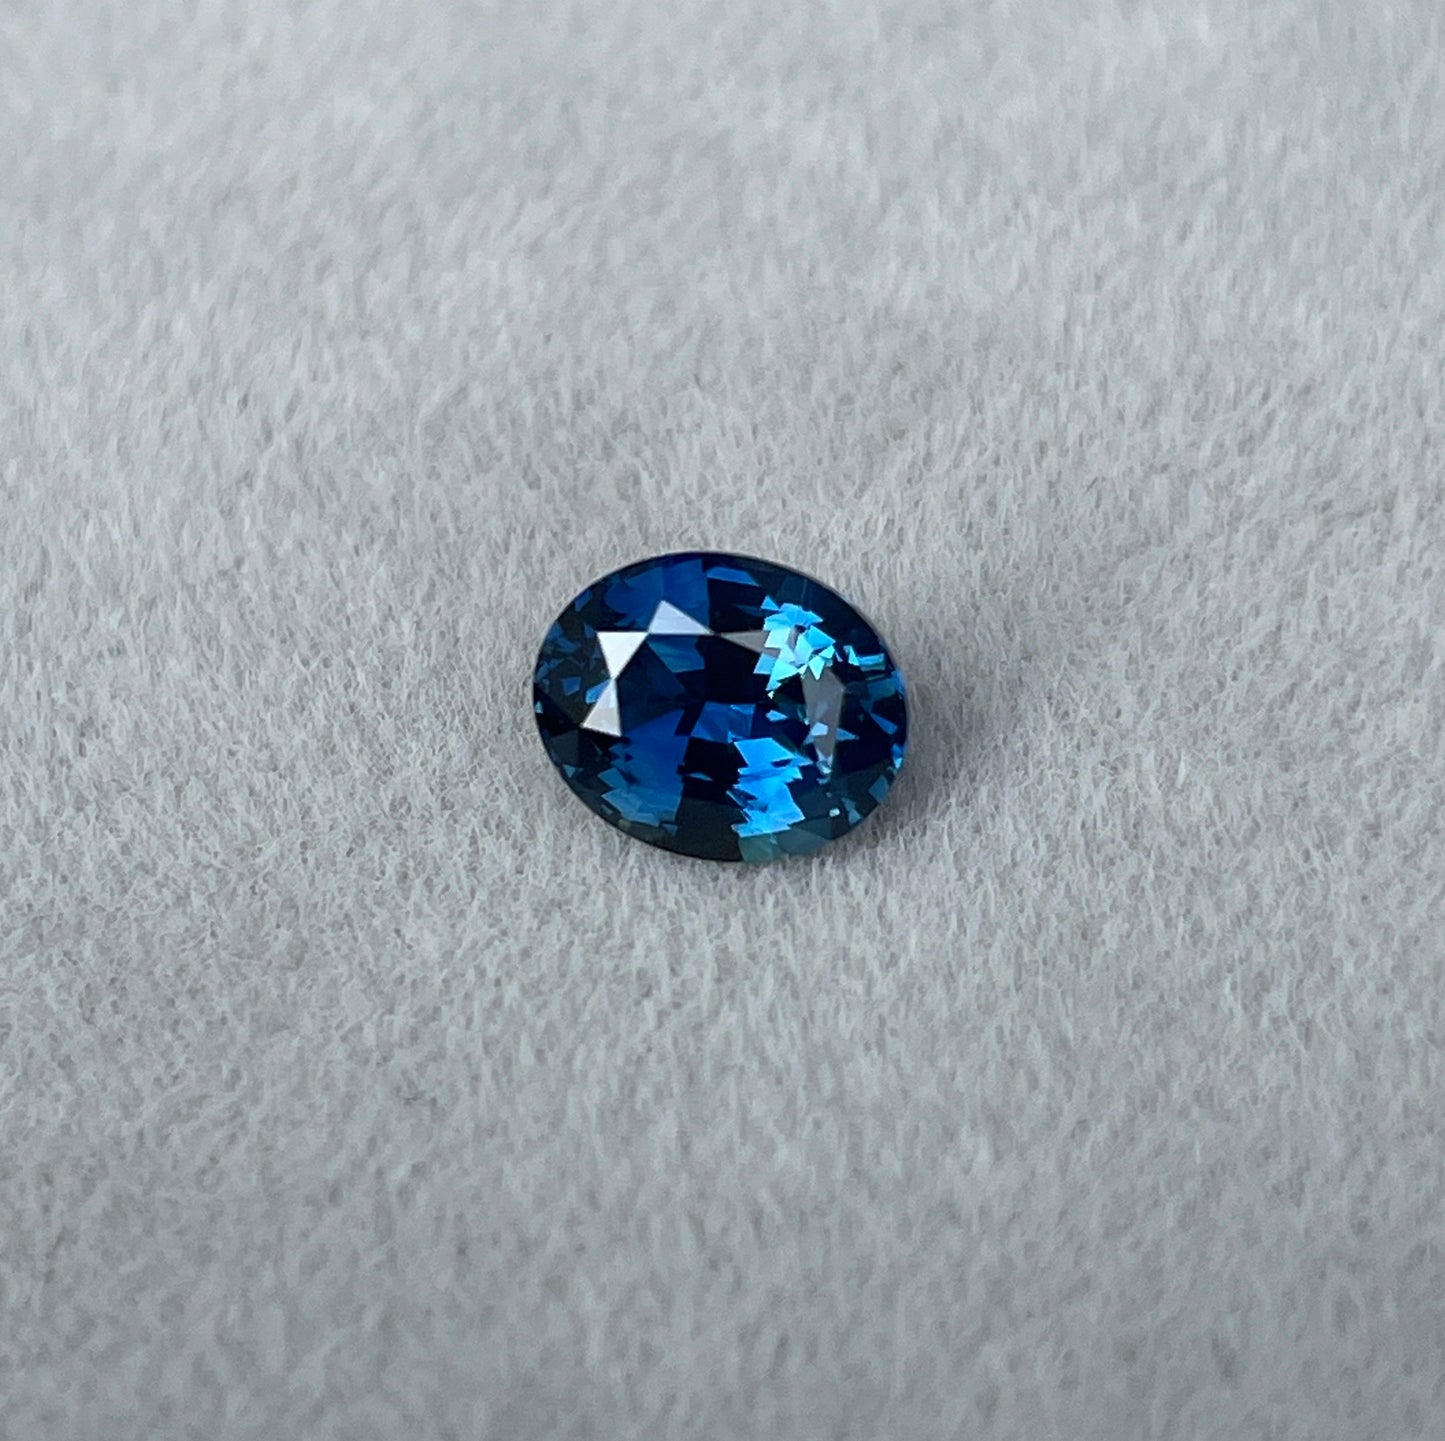 AAA Color Ceylon Blue Sapphire Loose Oval Cut Gemstone, Fine Quality Blue Sapphire Ring And Jewelry Making Gemstone 1.25 Ct